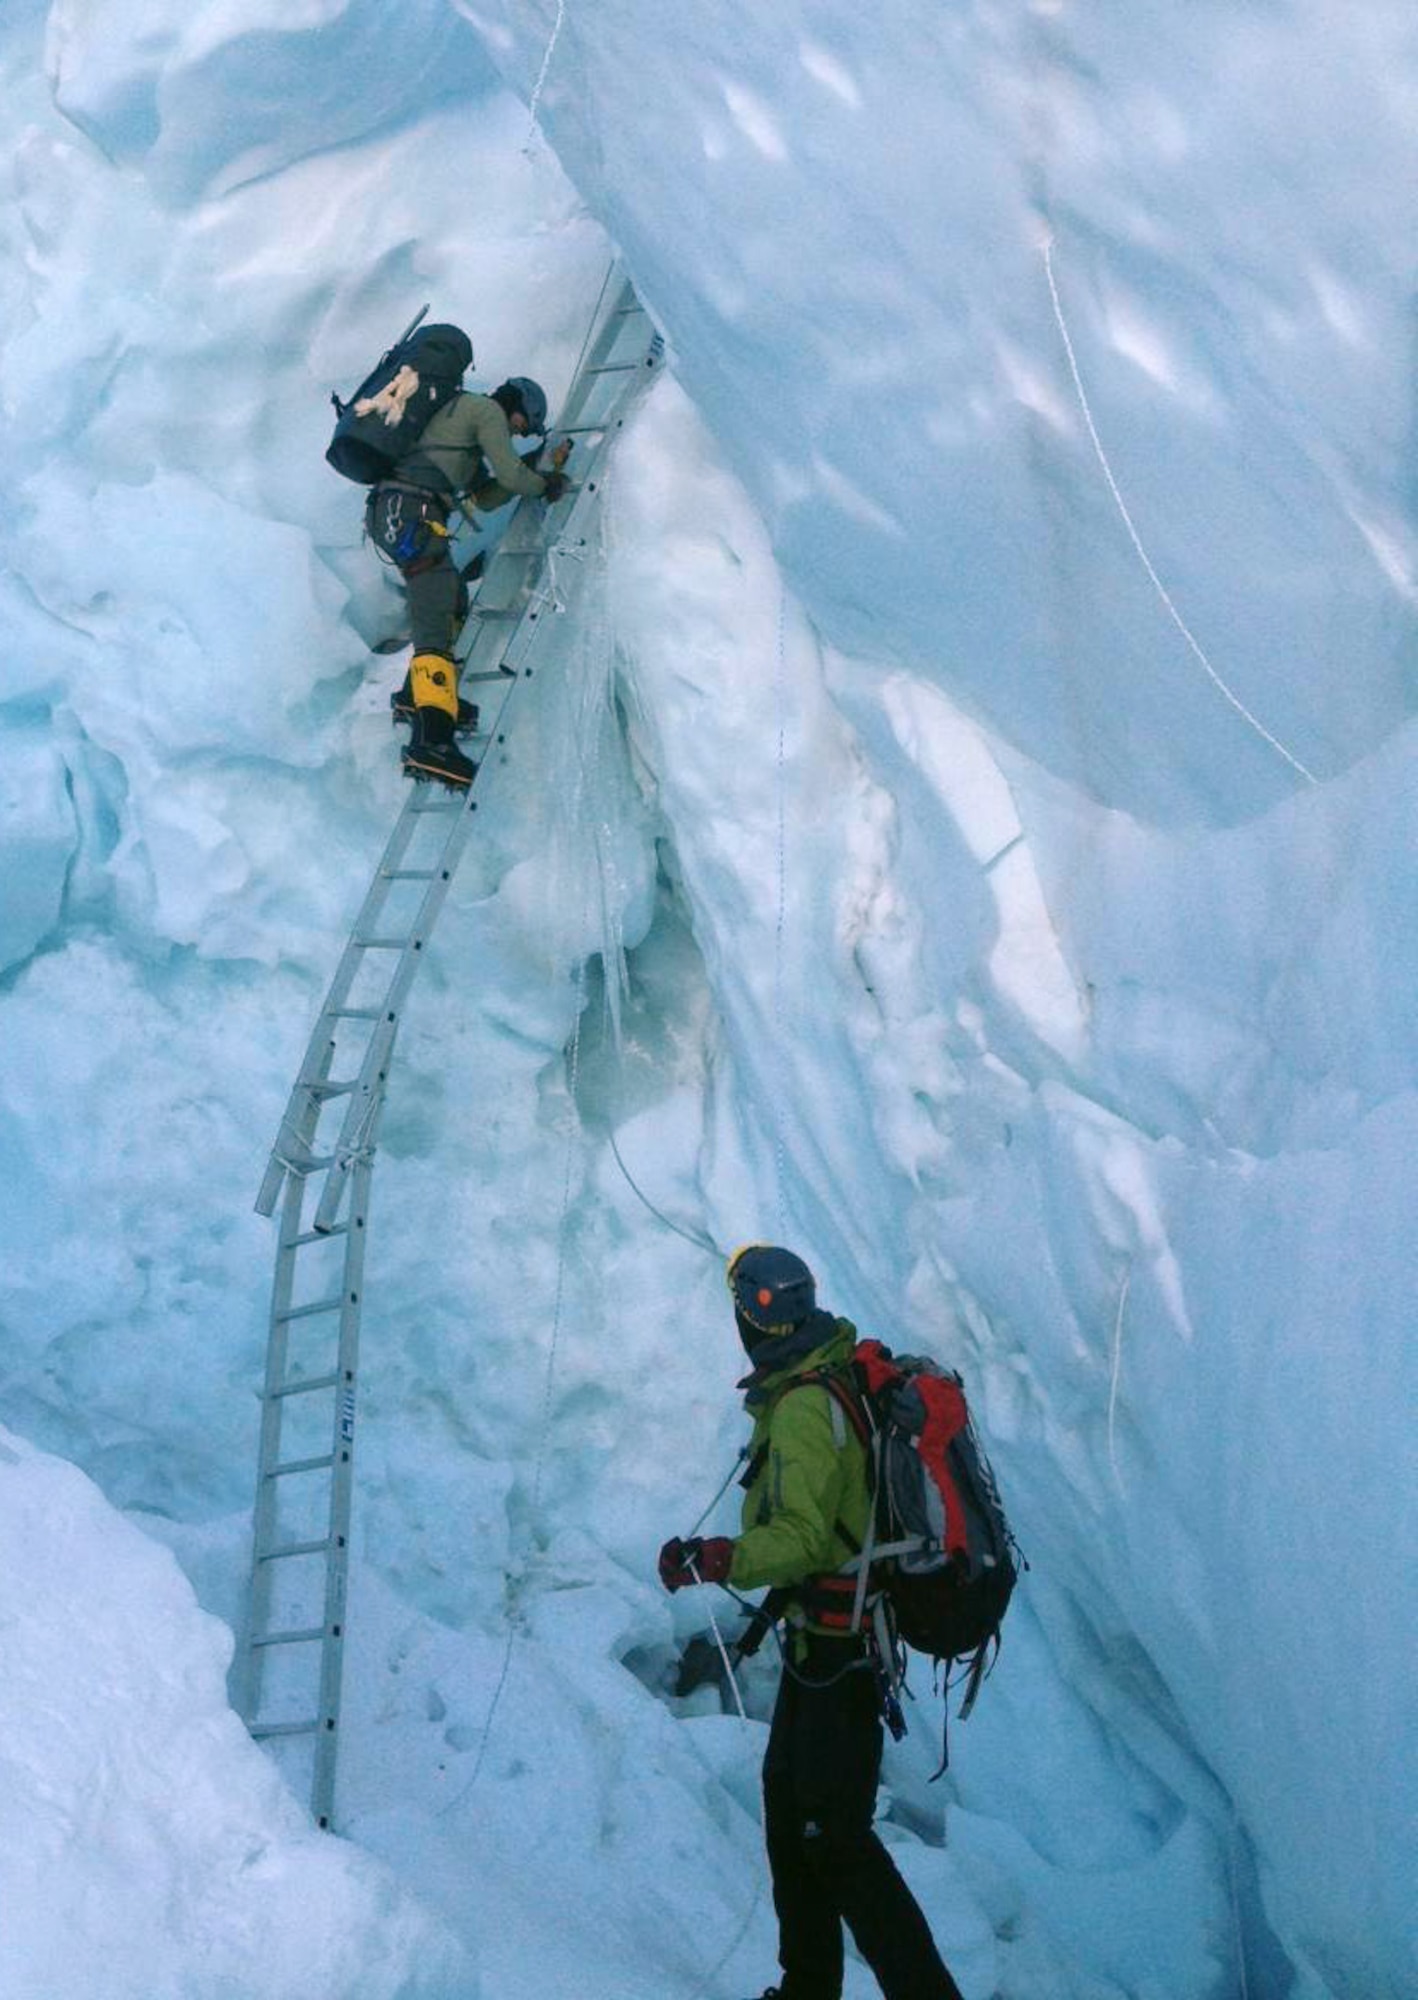 The Air Force Seven Summits Team moves through the Khumbu Icefall, a risky stretch of the Everest climb where large crevasses can open unexpectedly. Members of the team reached the top of the world's tallest mountain in May 2013. (U.S. Air Force photo)